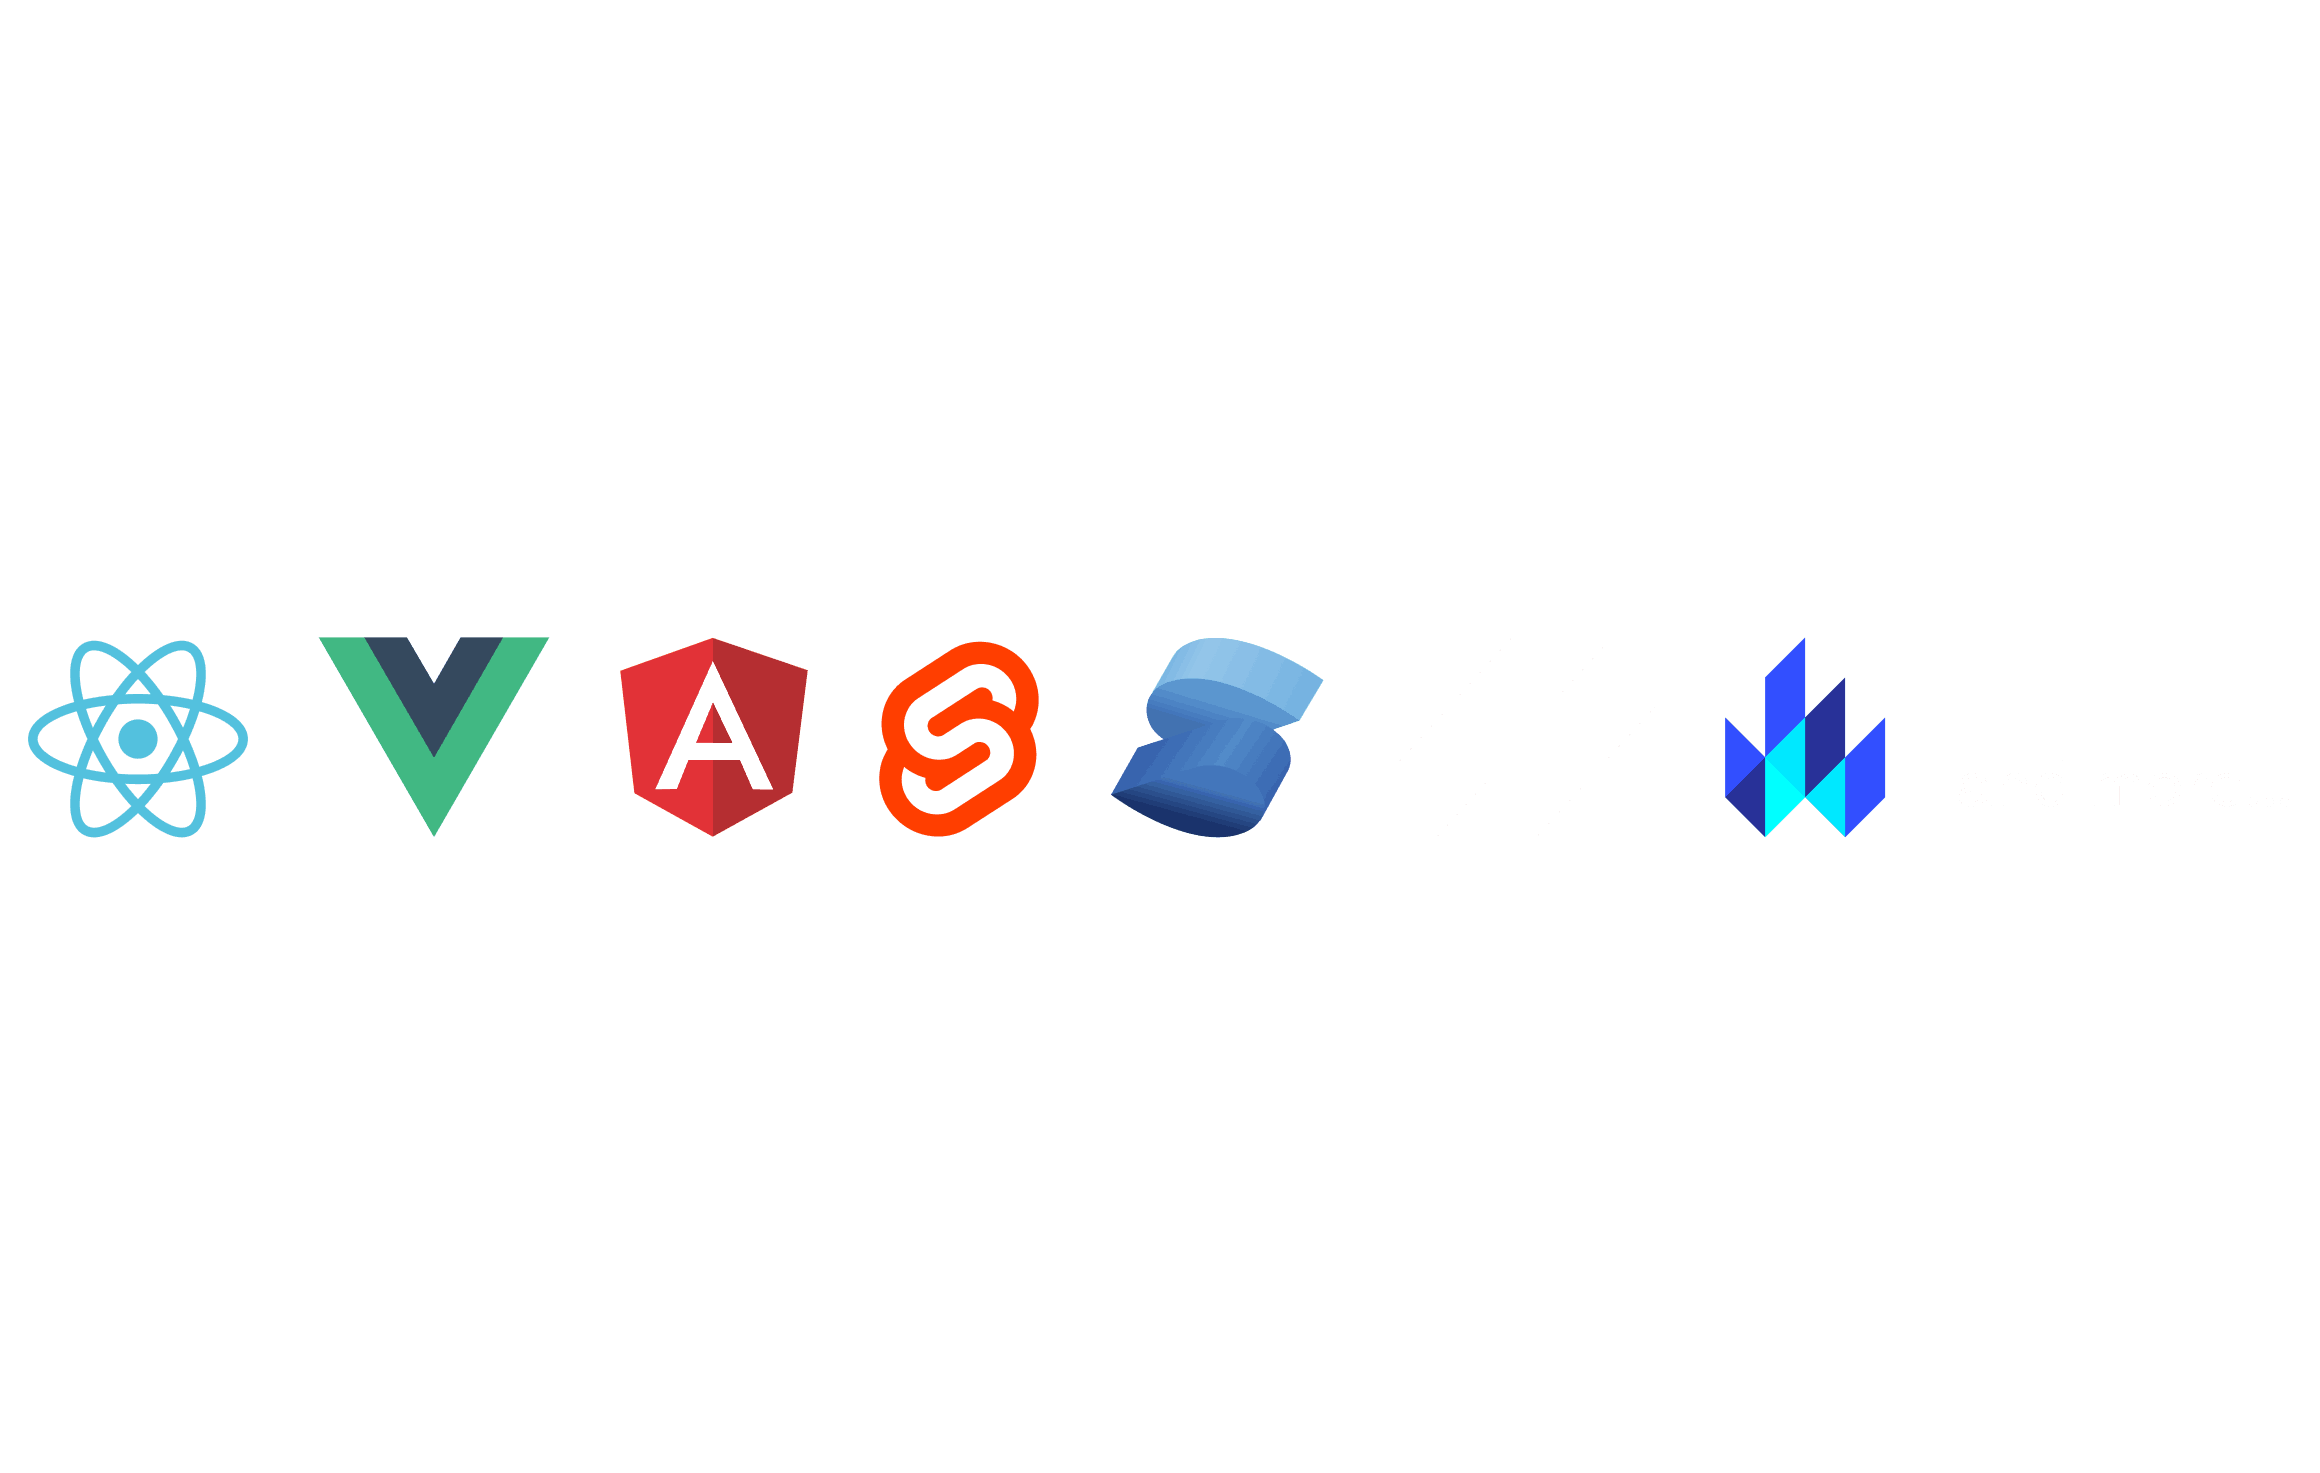 Logos of React, Vue.js, Angular, Svelte, Solid, Stencil and Lit